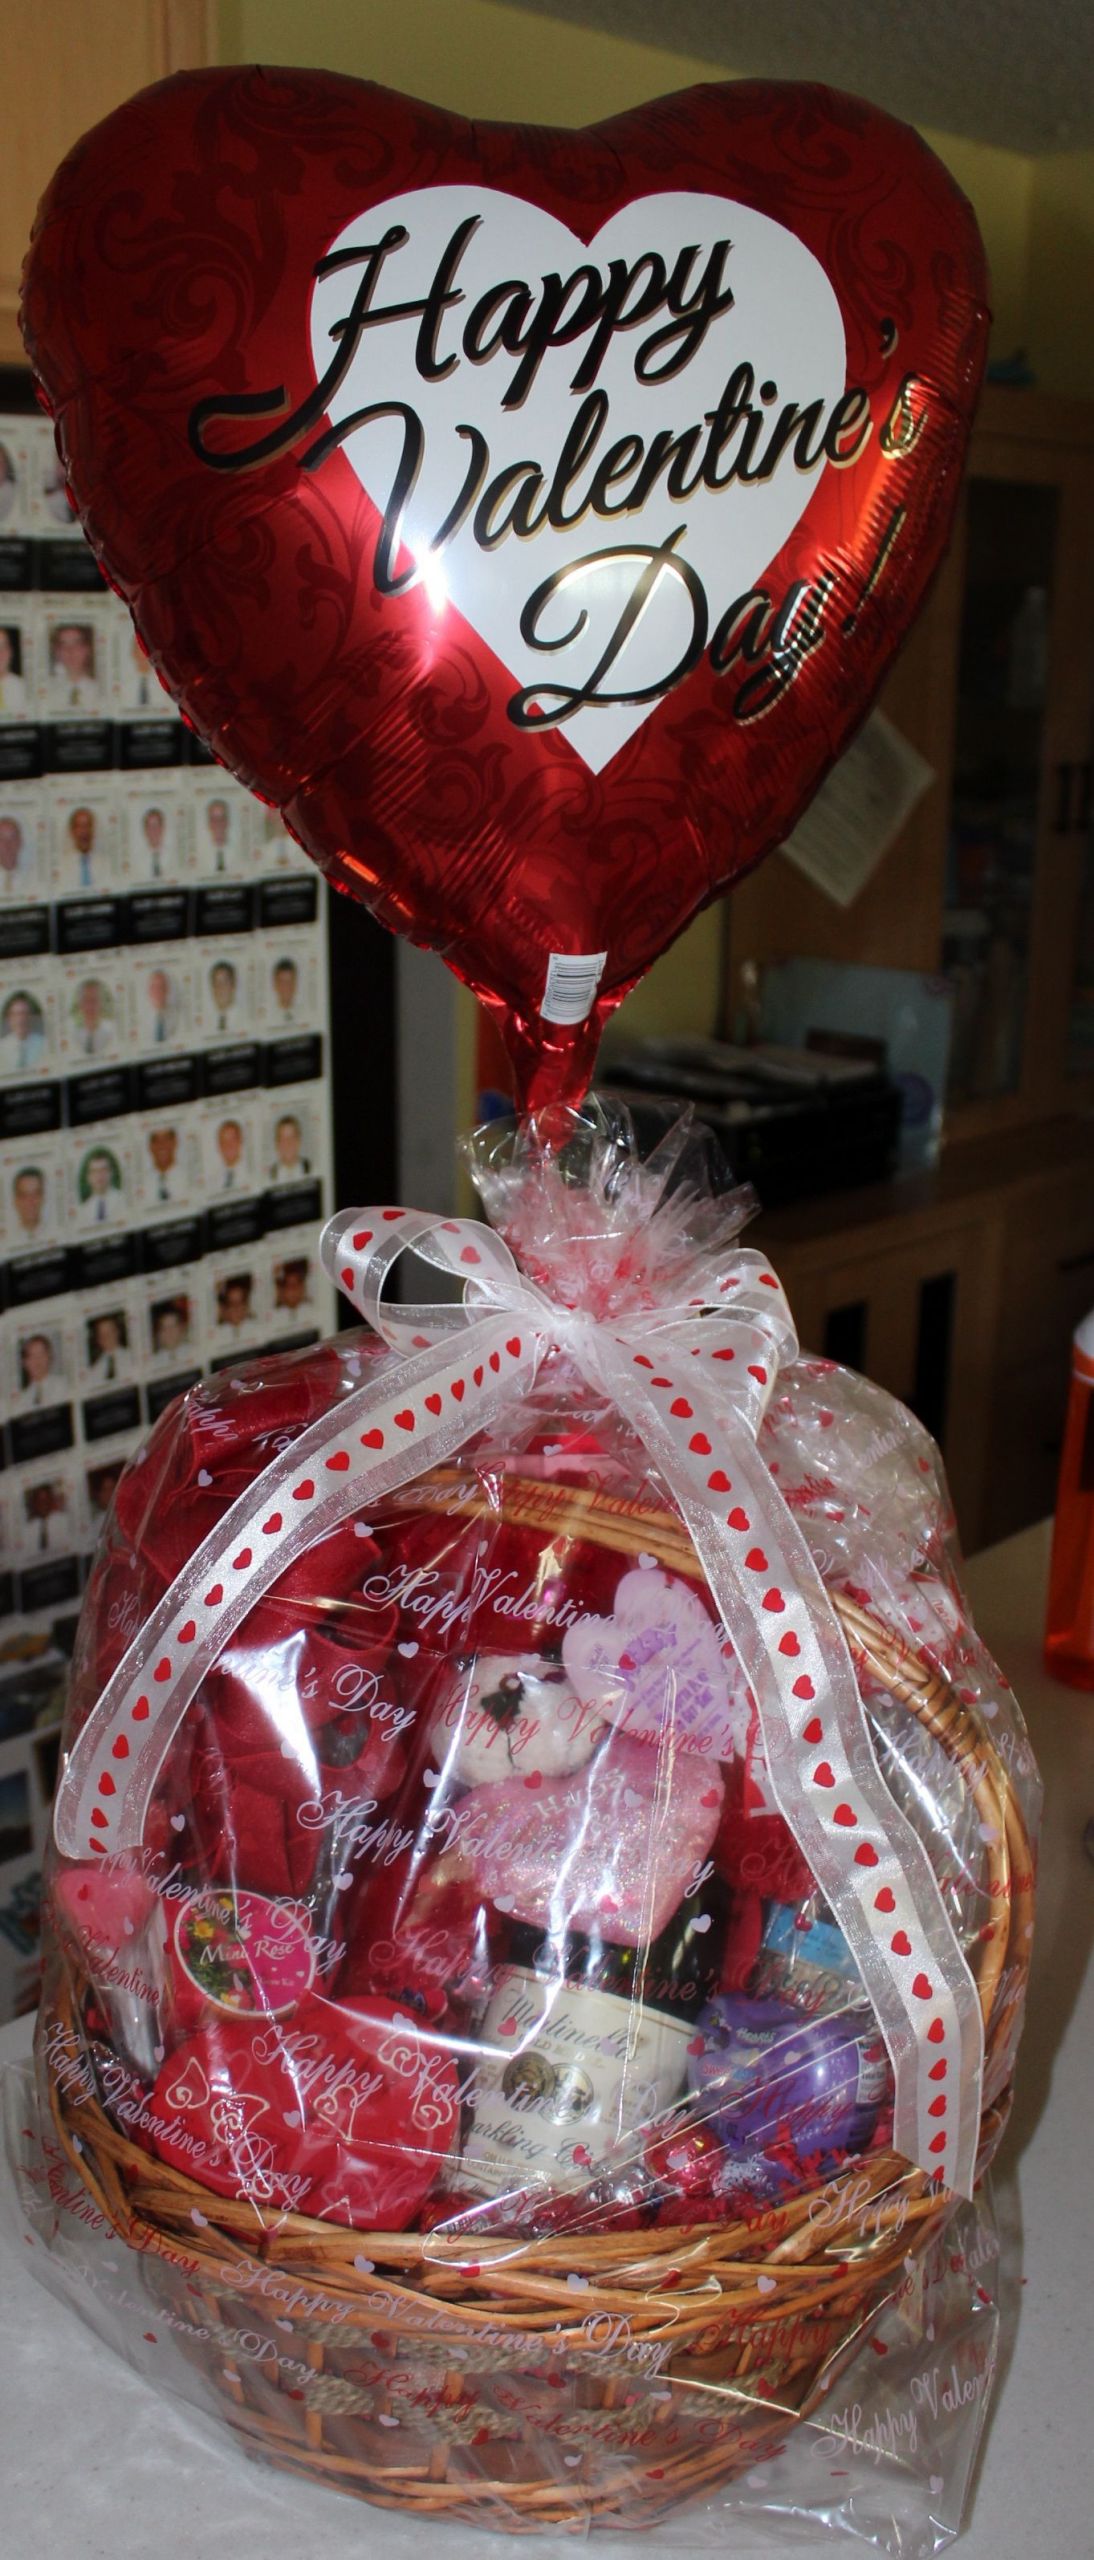 Gift Ideas For Her On Valentine'S Day
 47 How To Make A Valentine Gift Basket For Her Best Idea